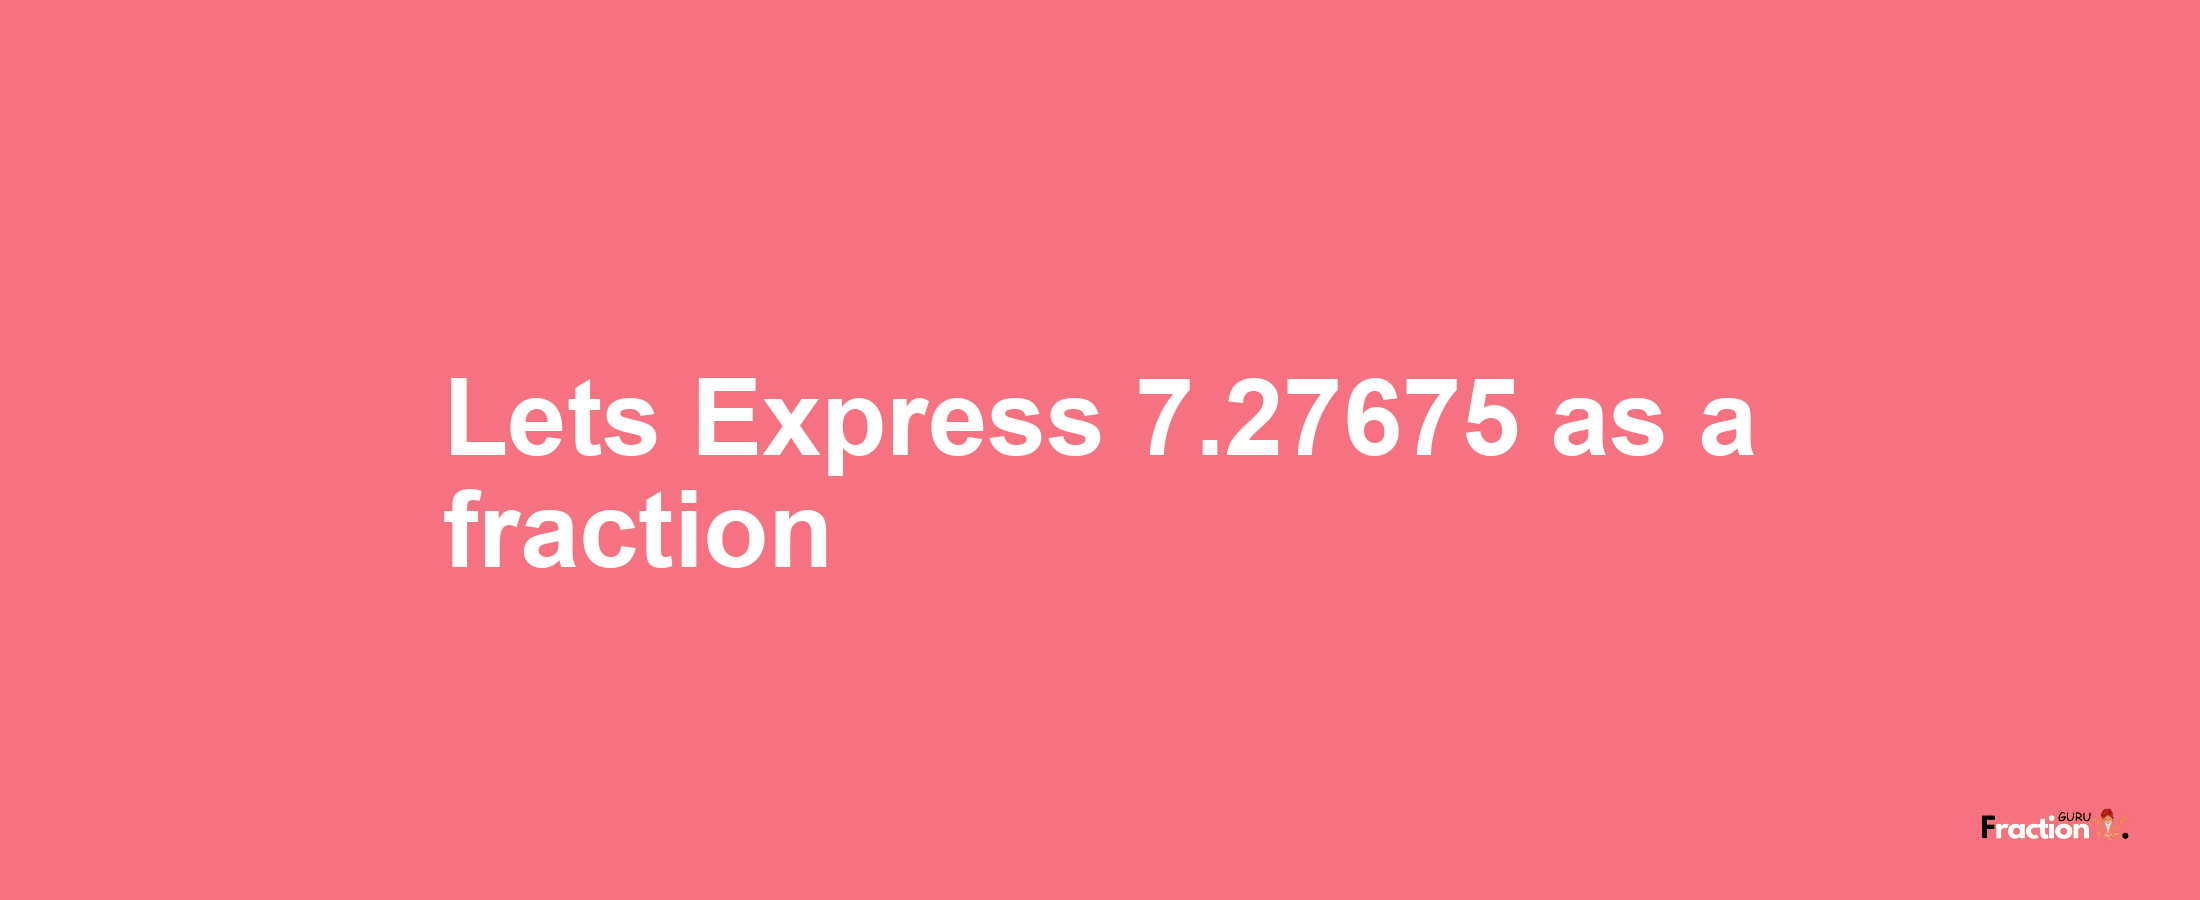 Lets Express 7.27675 as afraction